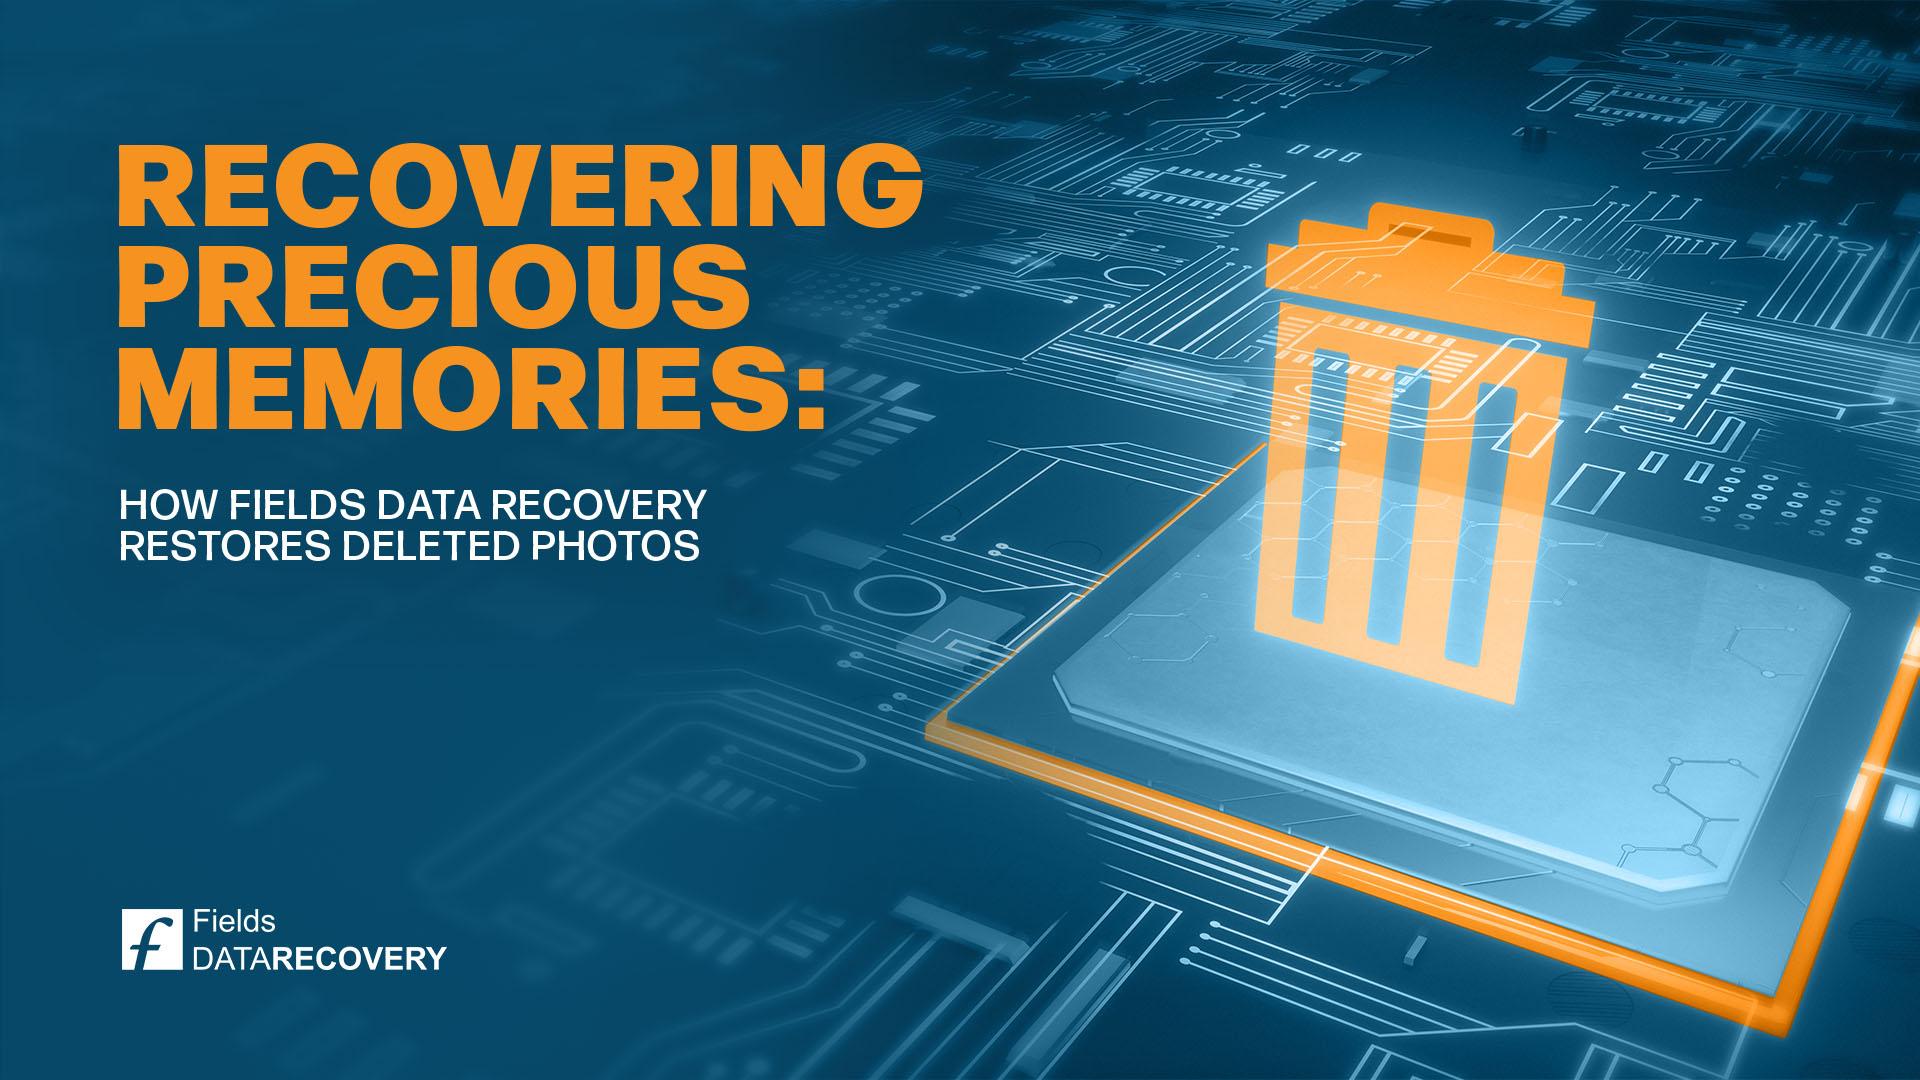 Recovering Precious Memories: How Fields Data Recovery Restores Deleted Photos